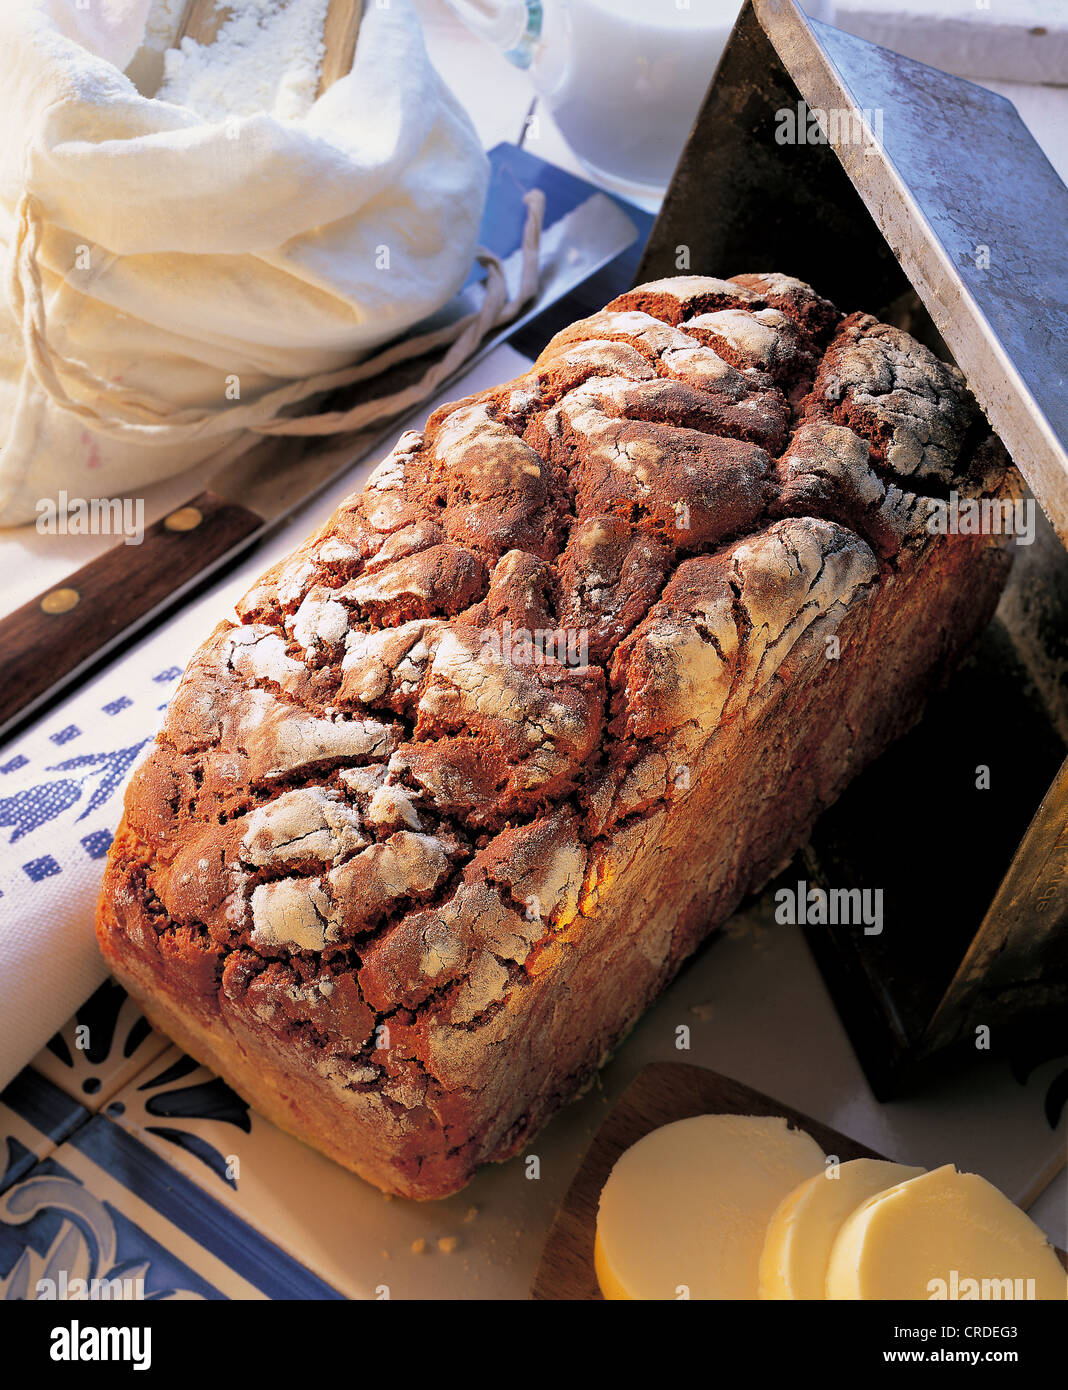 Bruin Brood tin loaf, The Netherlands. Stock Photo